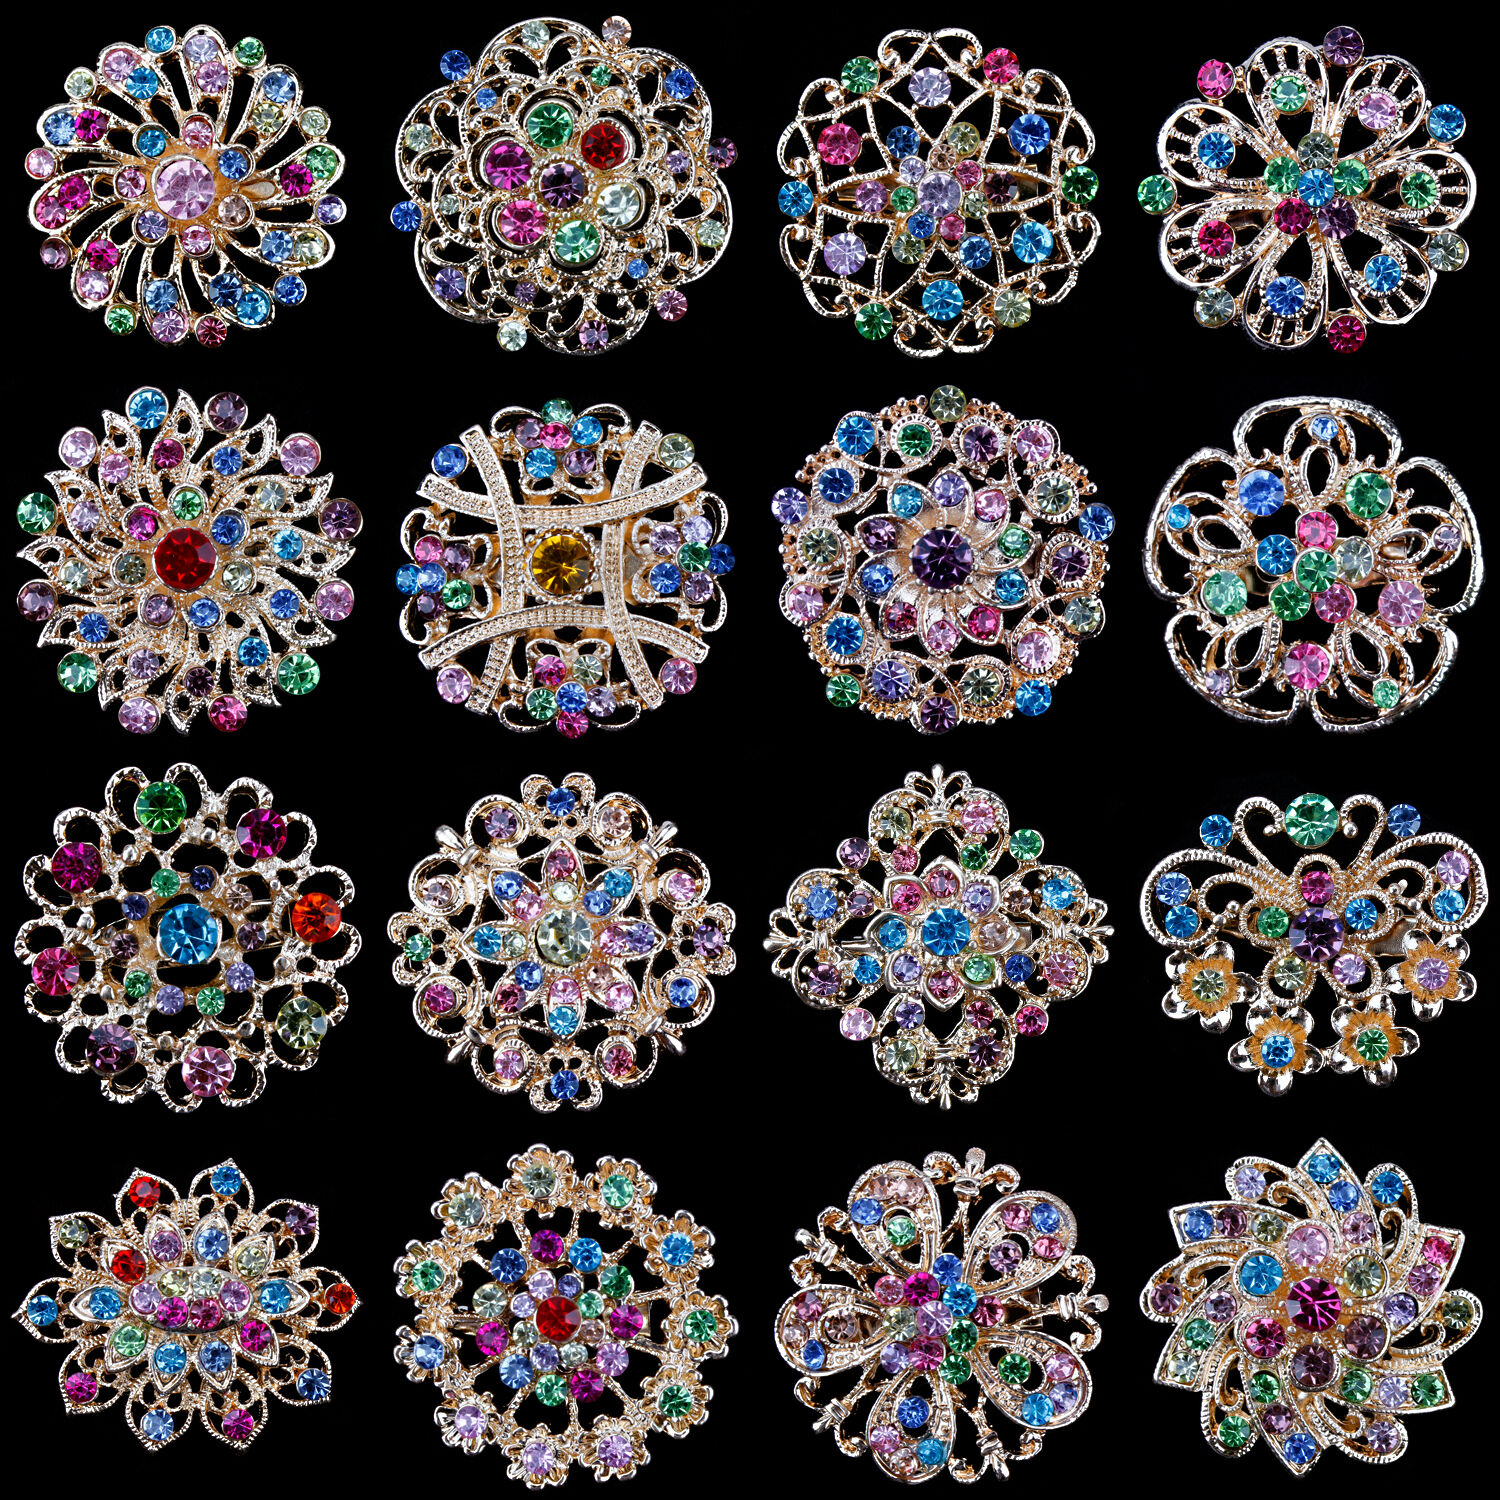 Lot 16 Pc Mixed Vintage Style Golden Rhinestone Crystal Brooch Pin Diy Bouquet